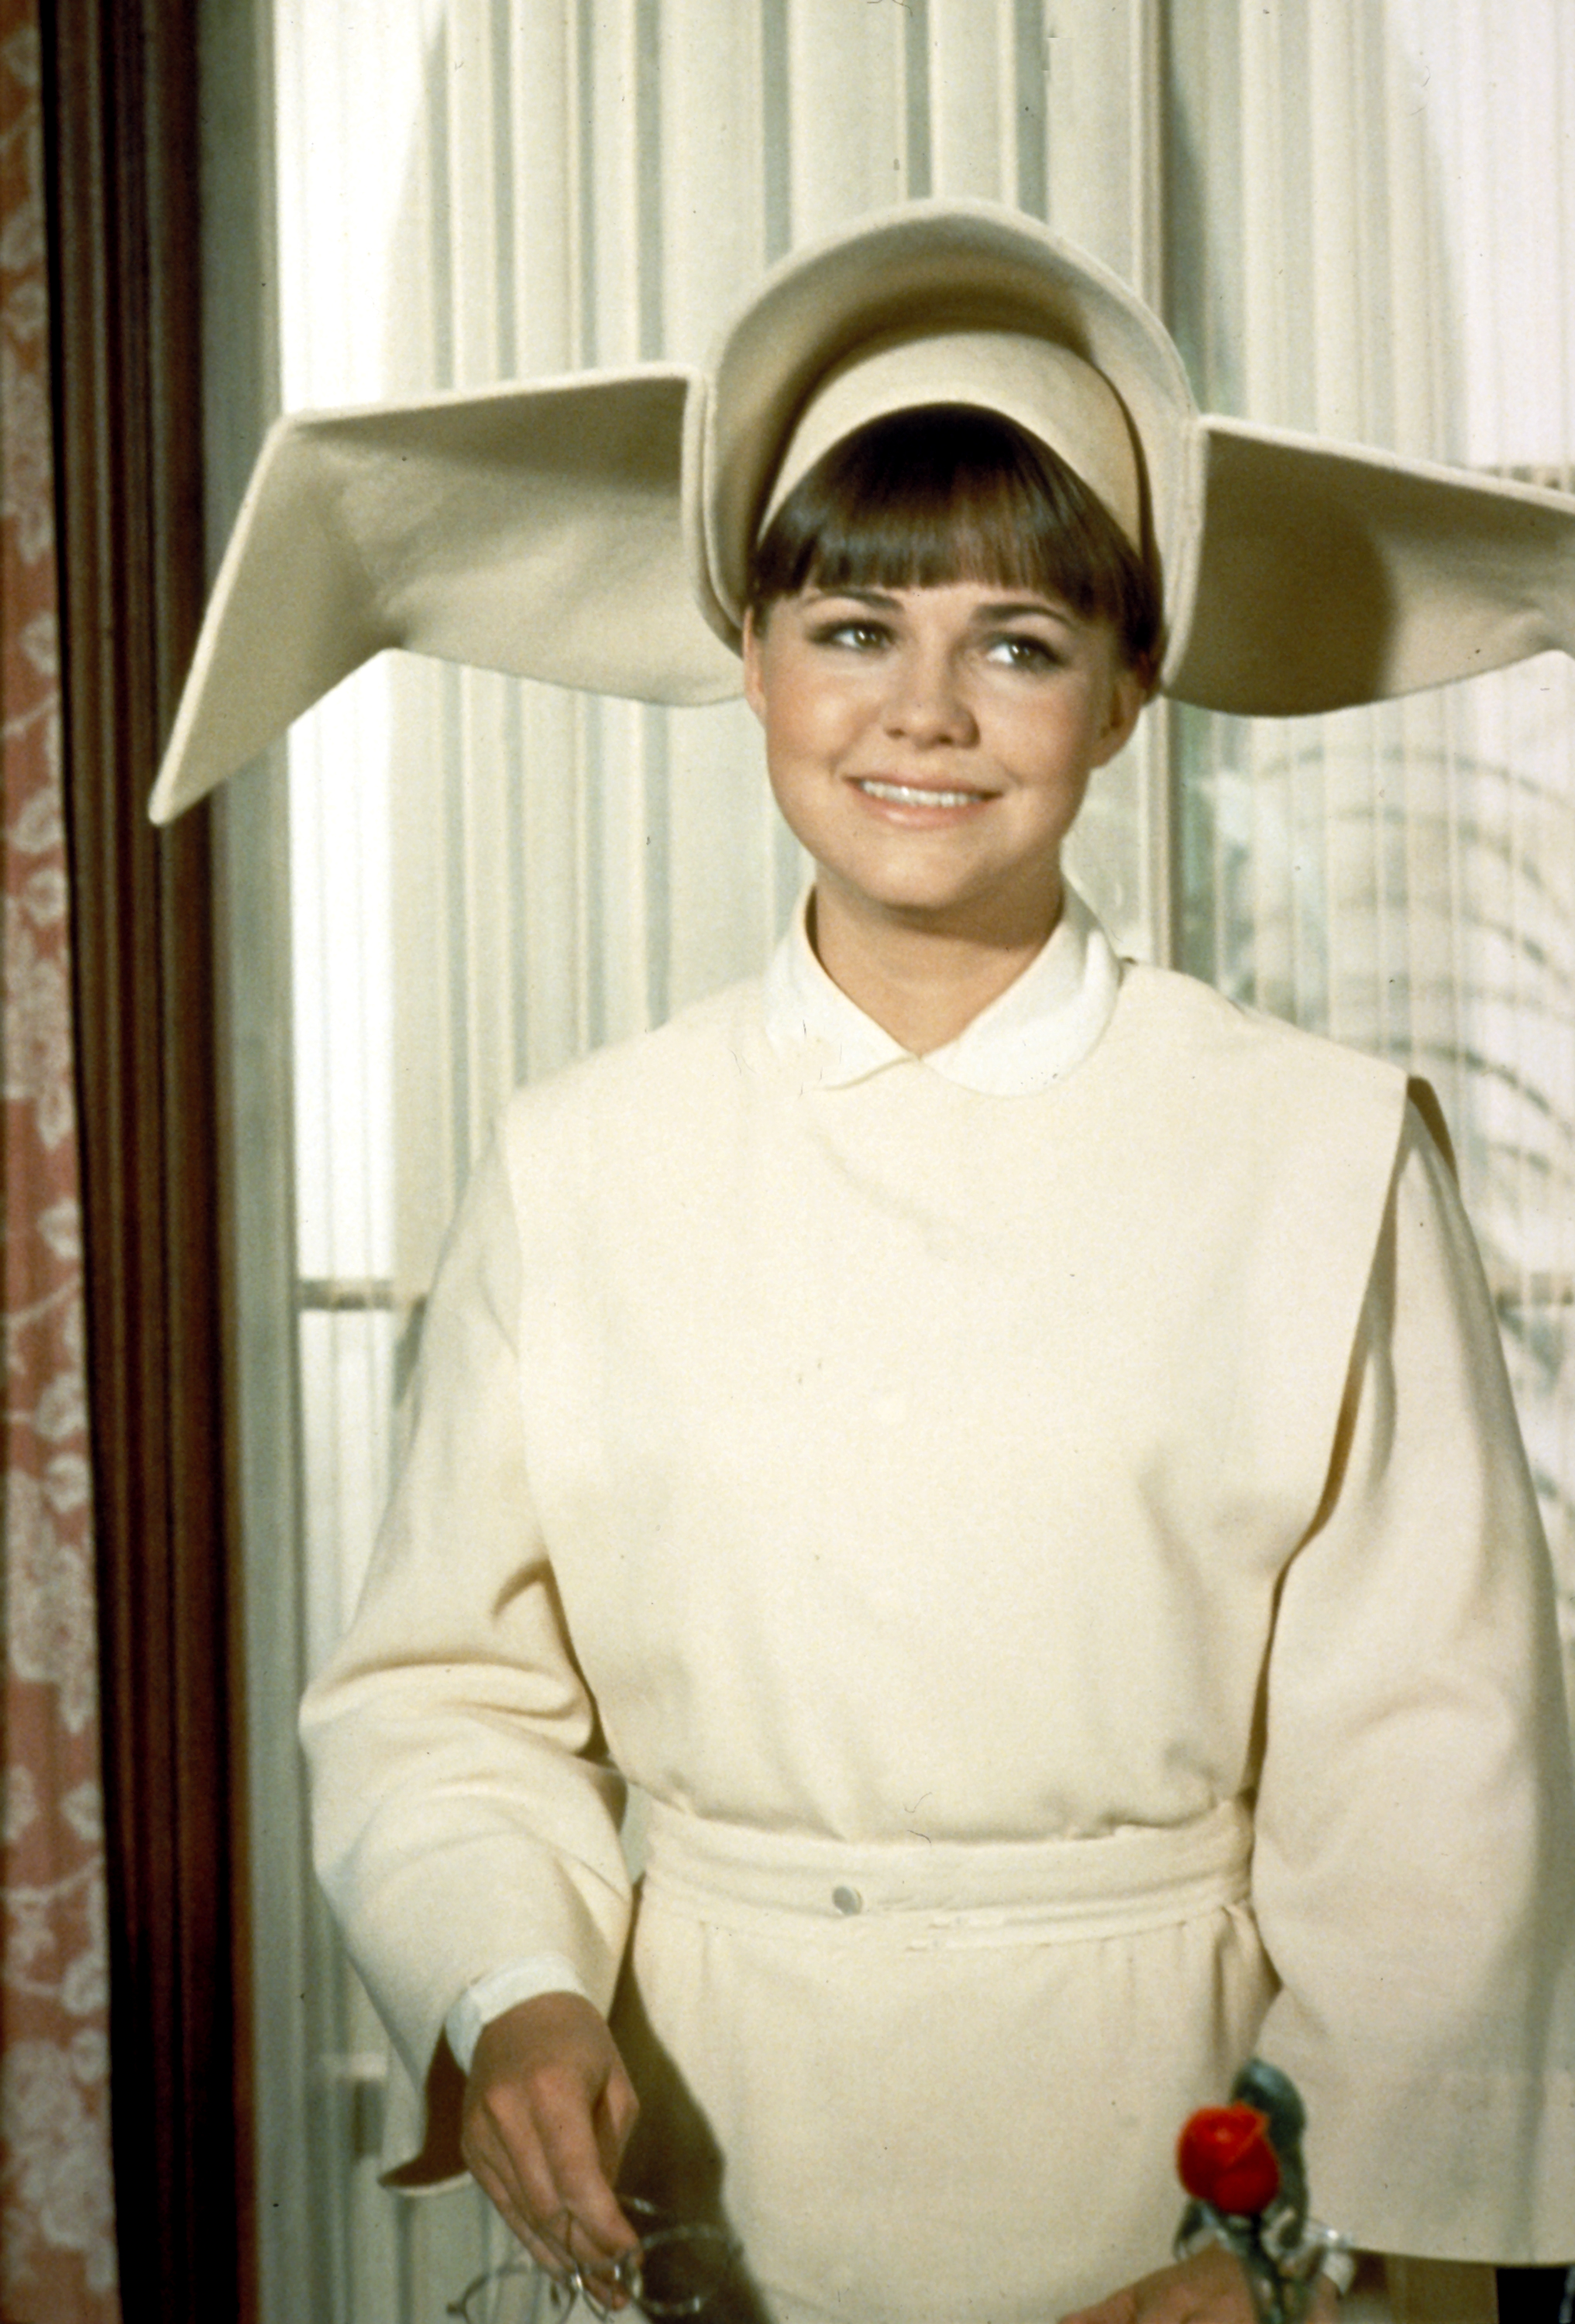 Sally Field as Sister Bertrille in the TV show "The Flying Nun" on September 17, 1969 | Source: Getty Images